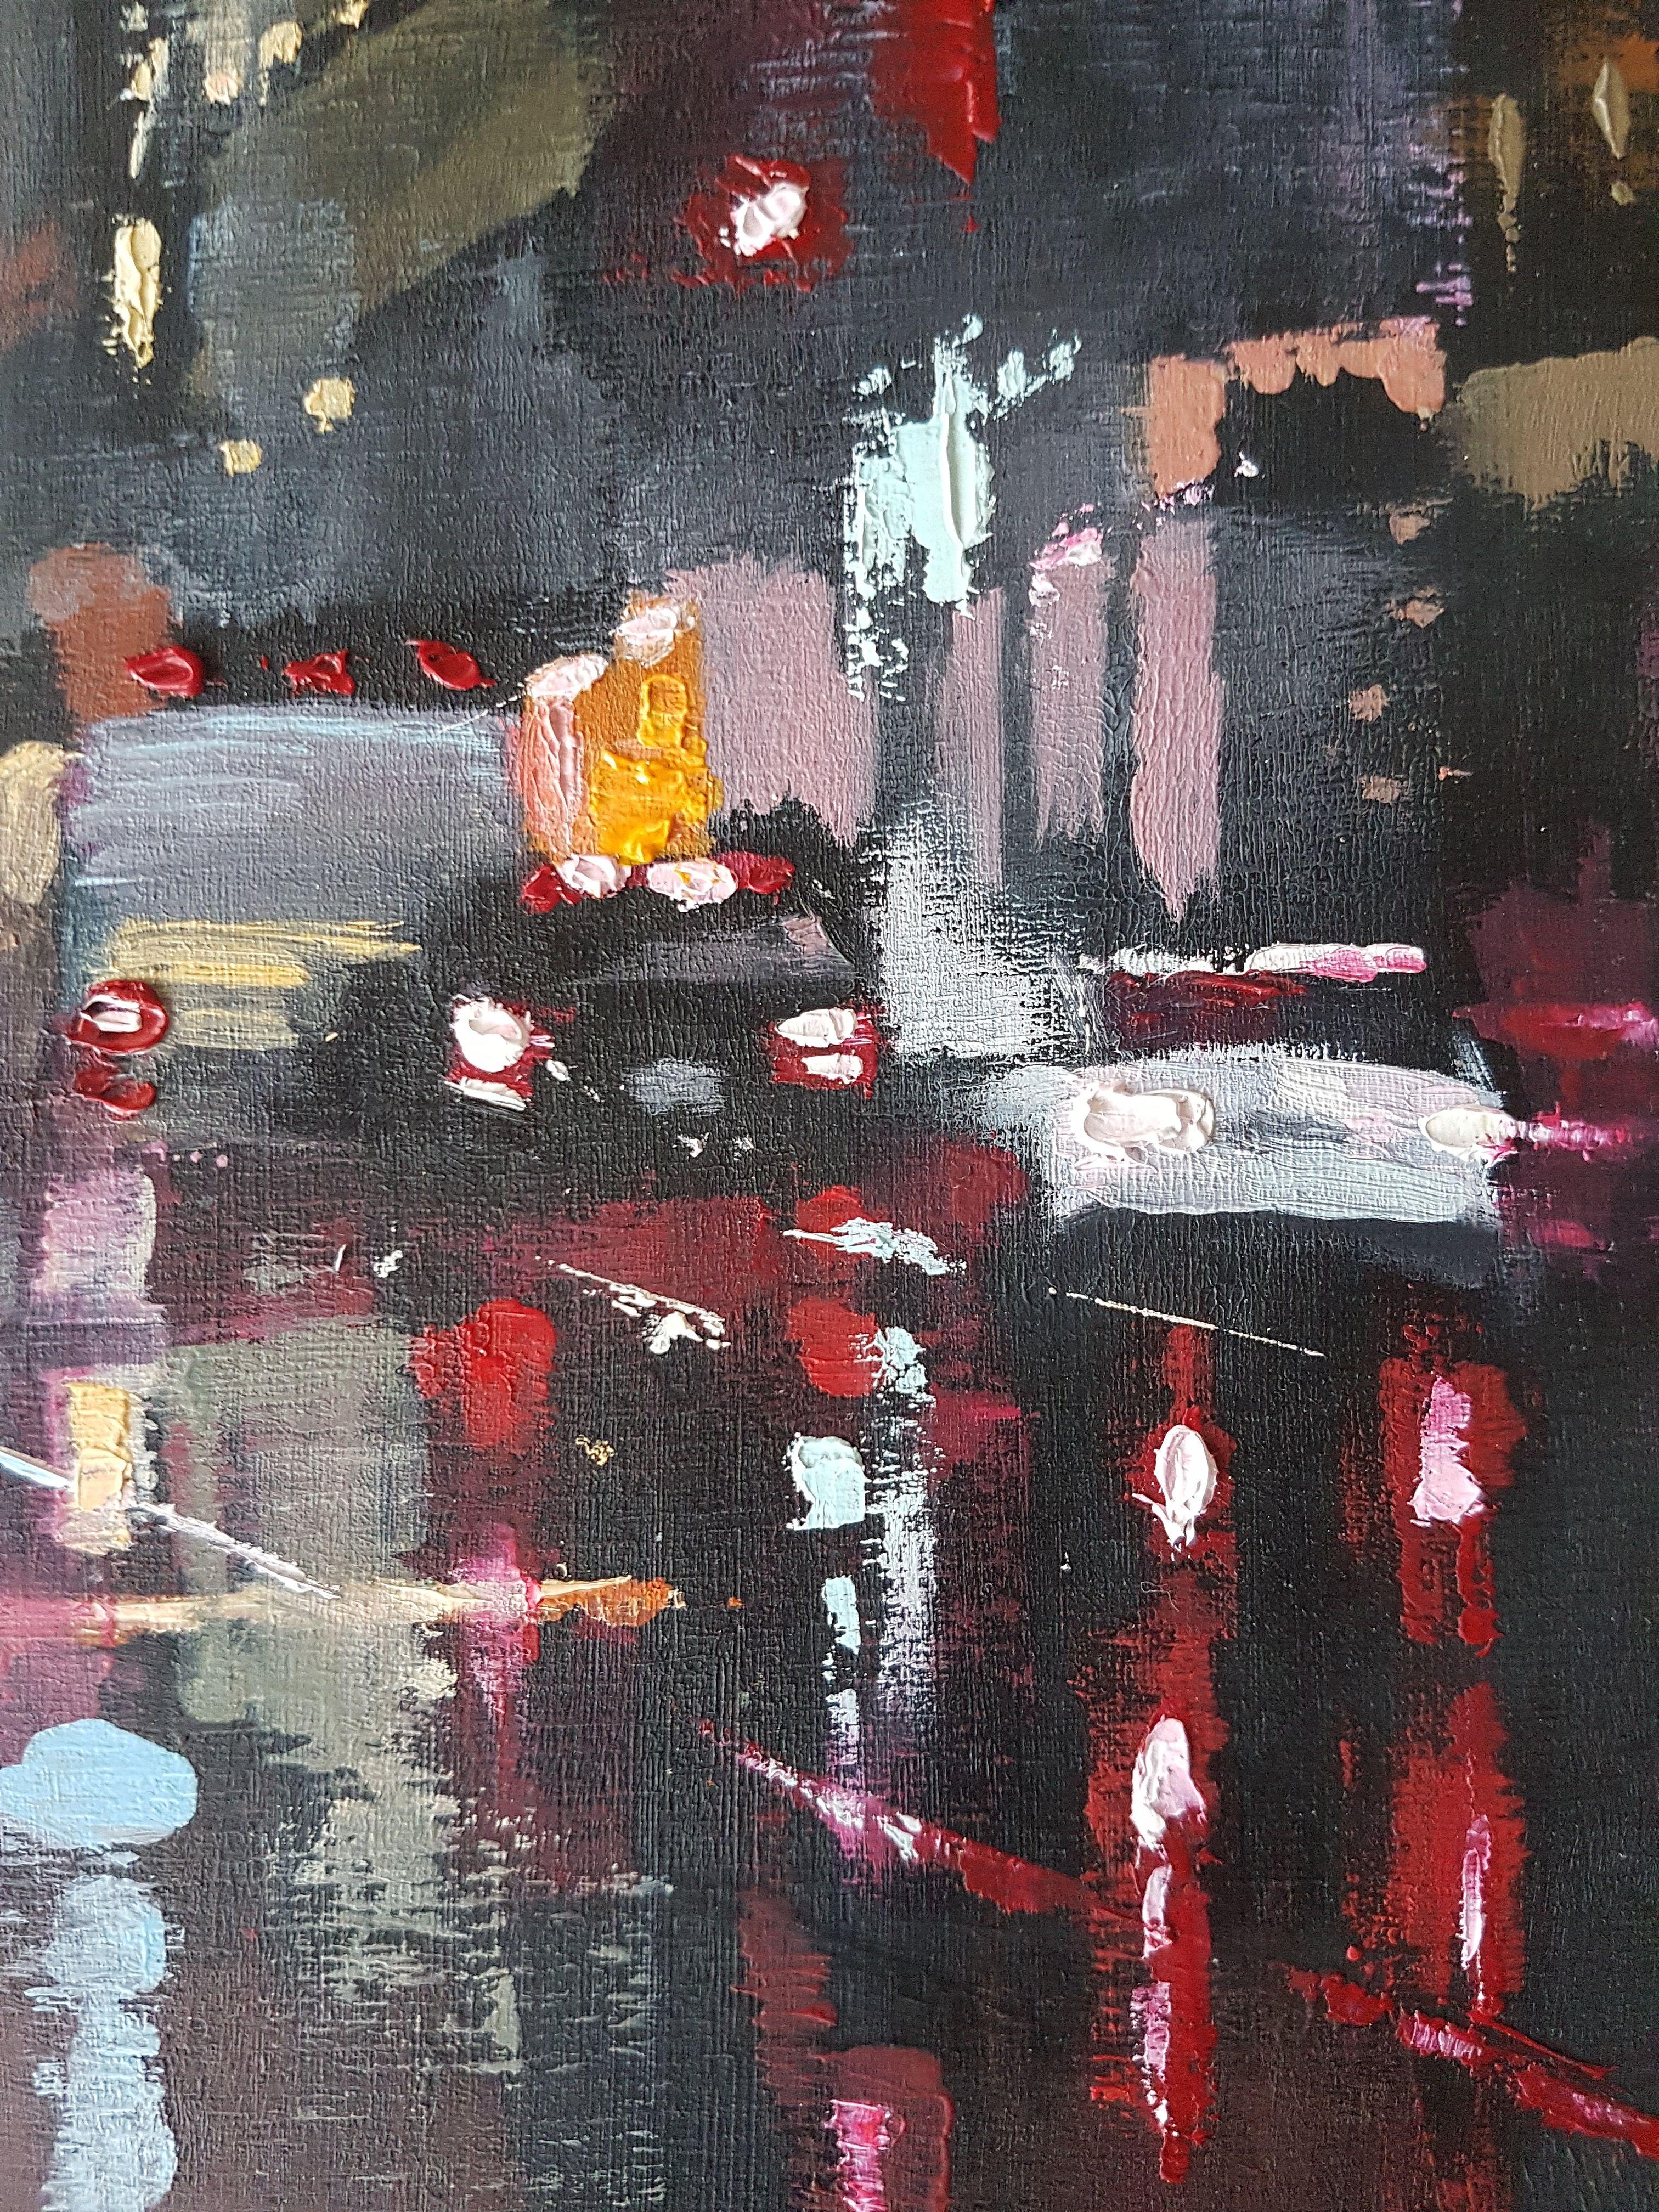 Reflections Of The Night, Painting, Oil on MDF Panel 1